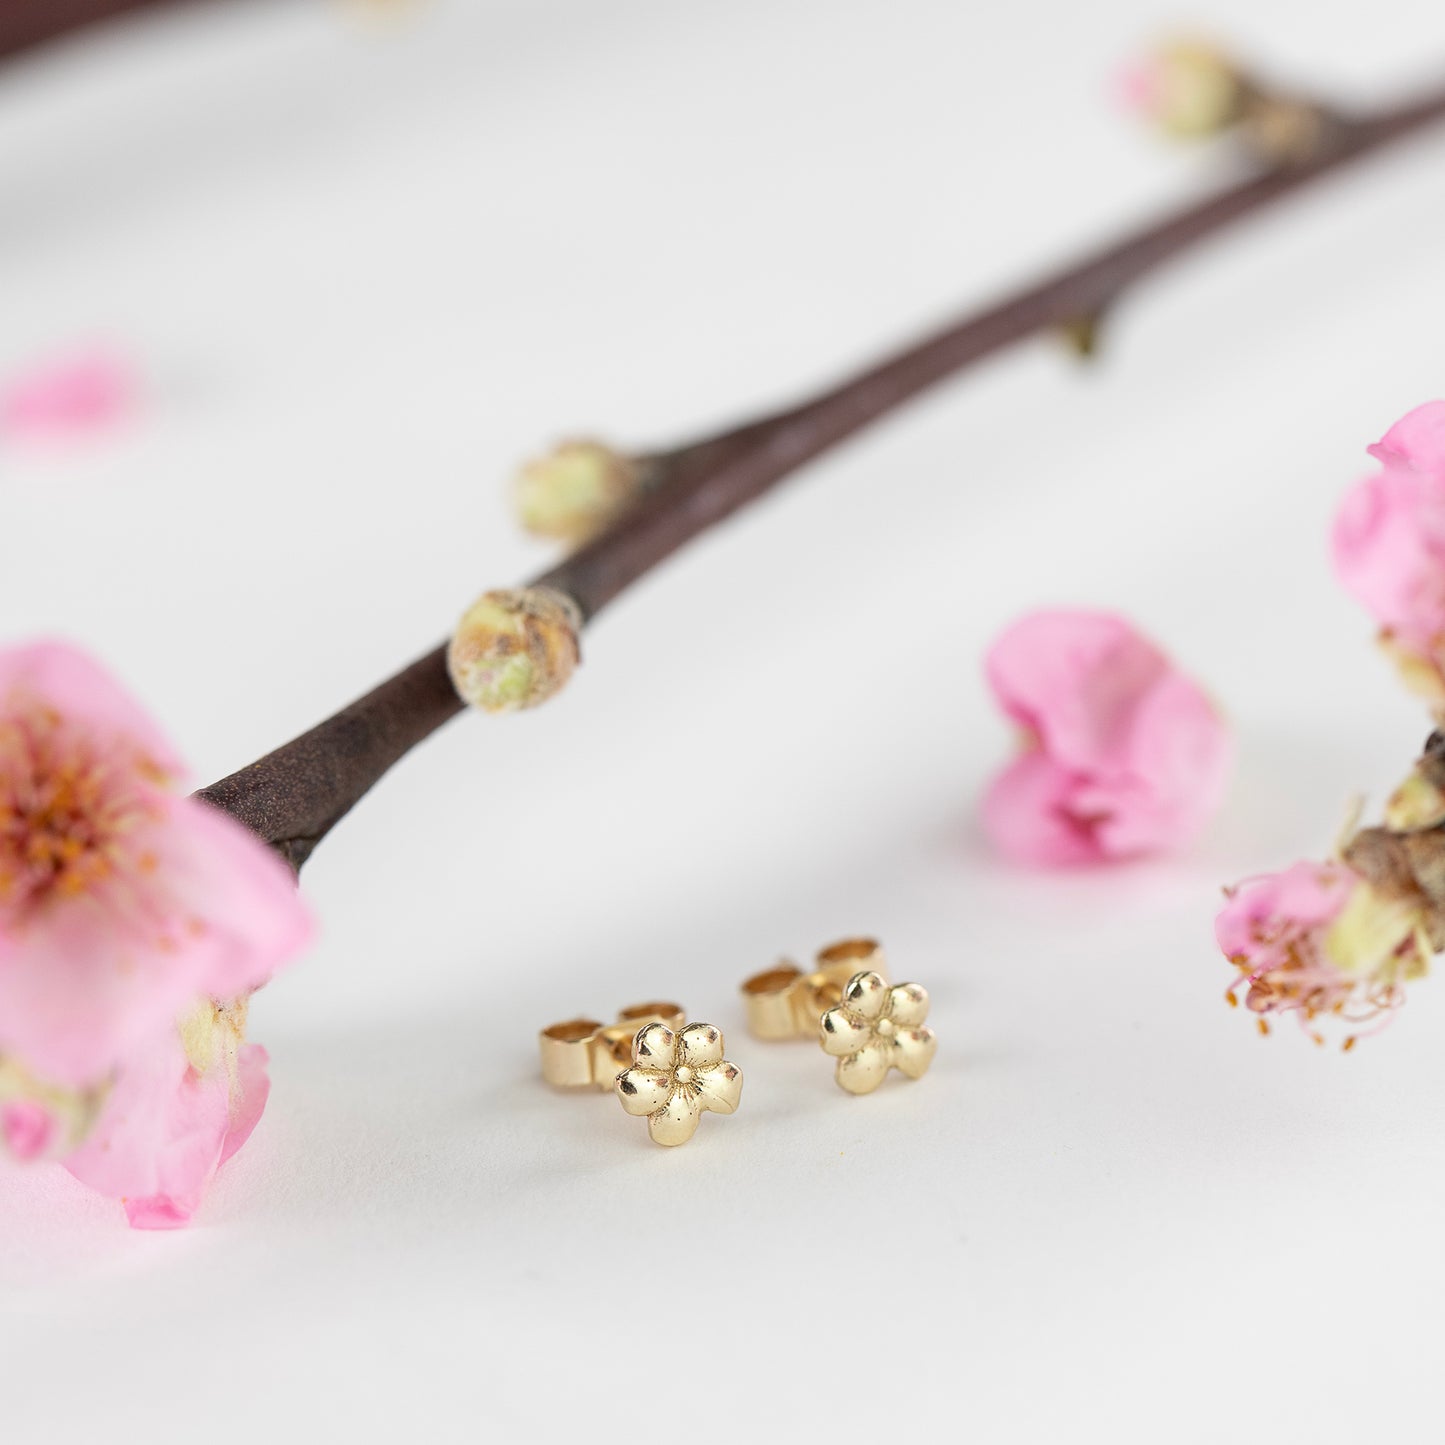 March Birth Flower Earrings - Cherry Blossom Studs - 9kt Gold